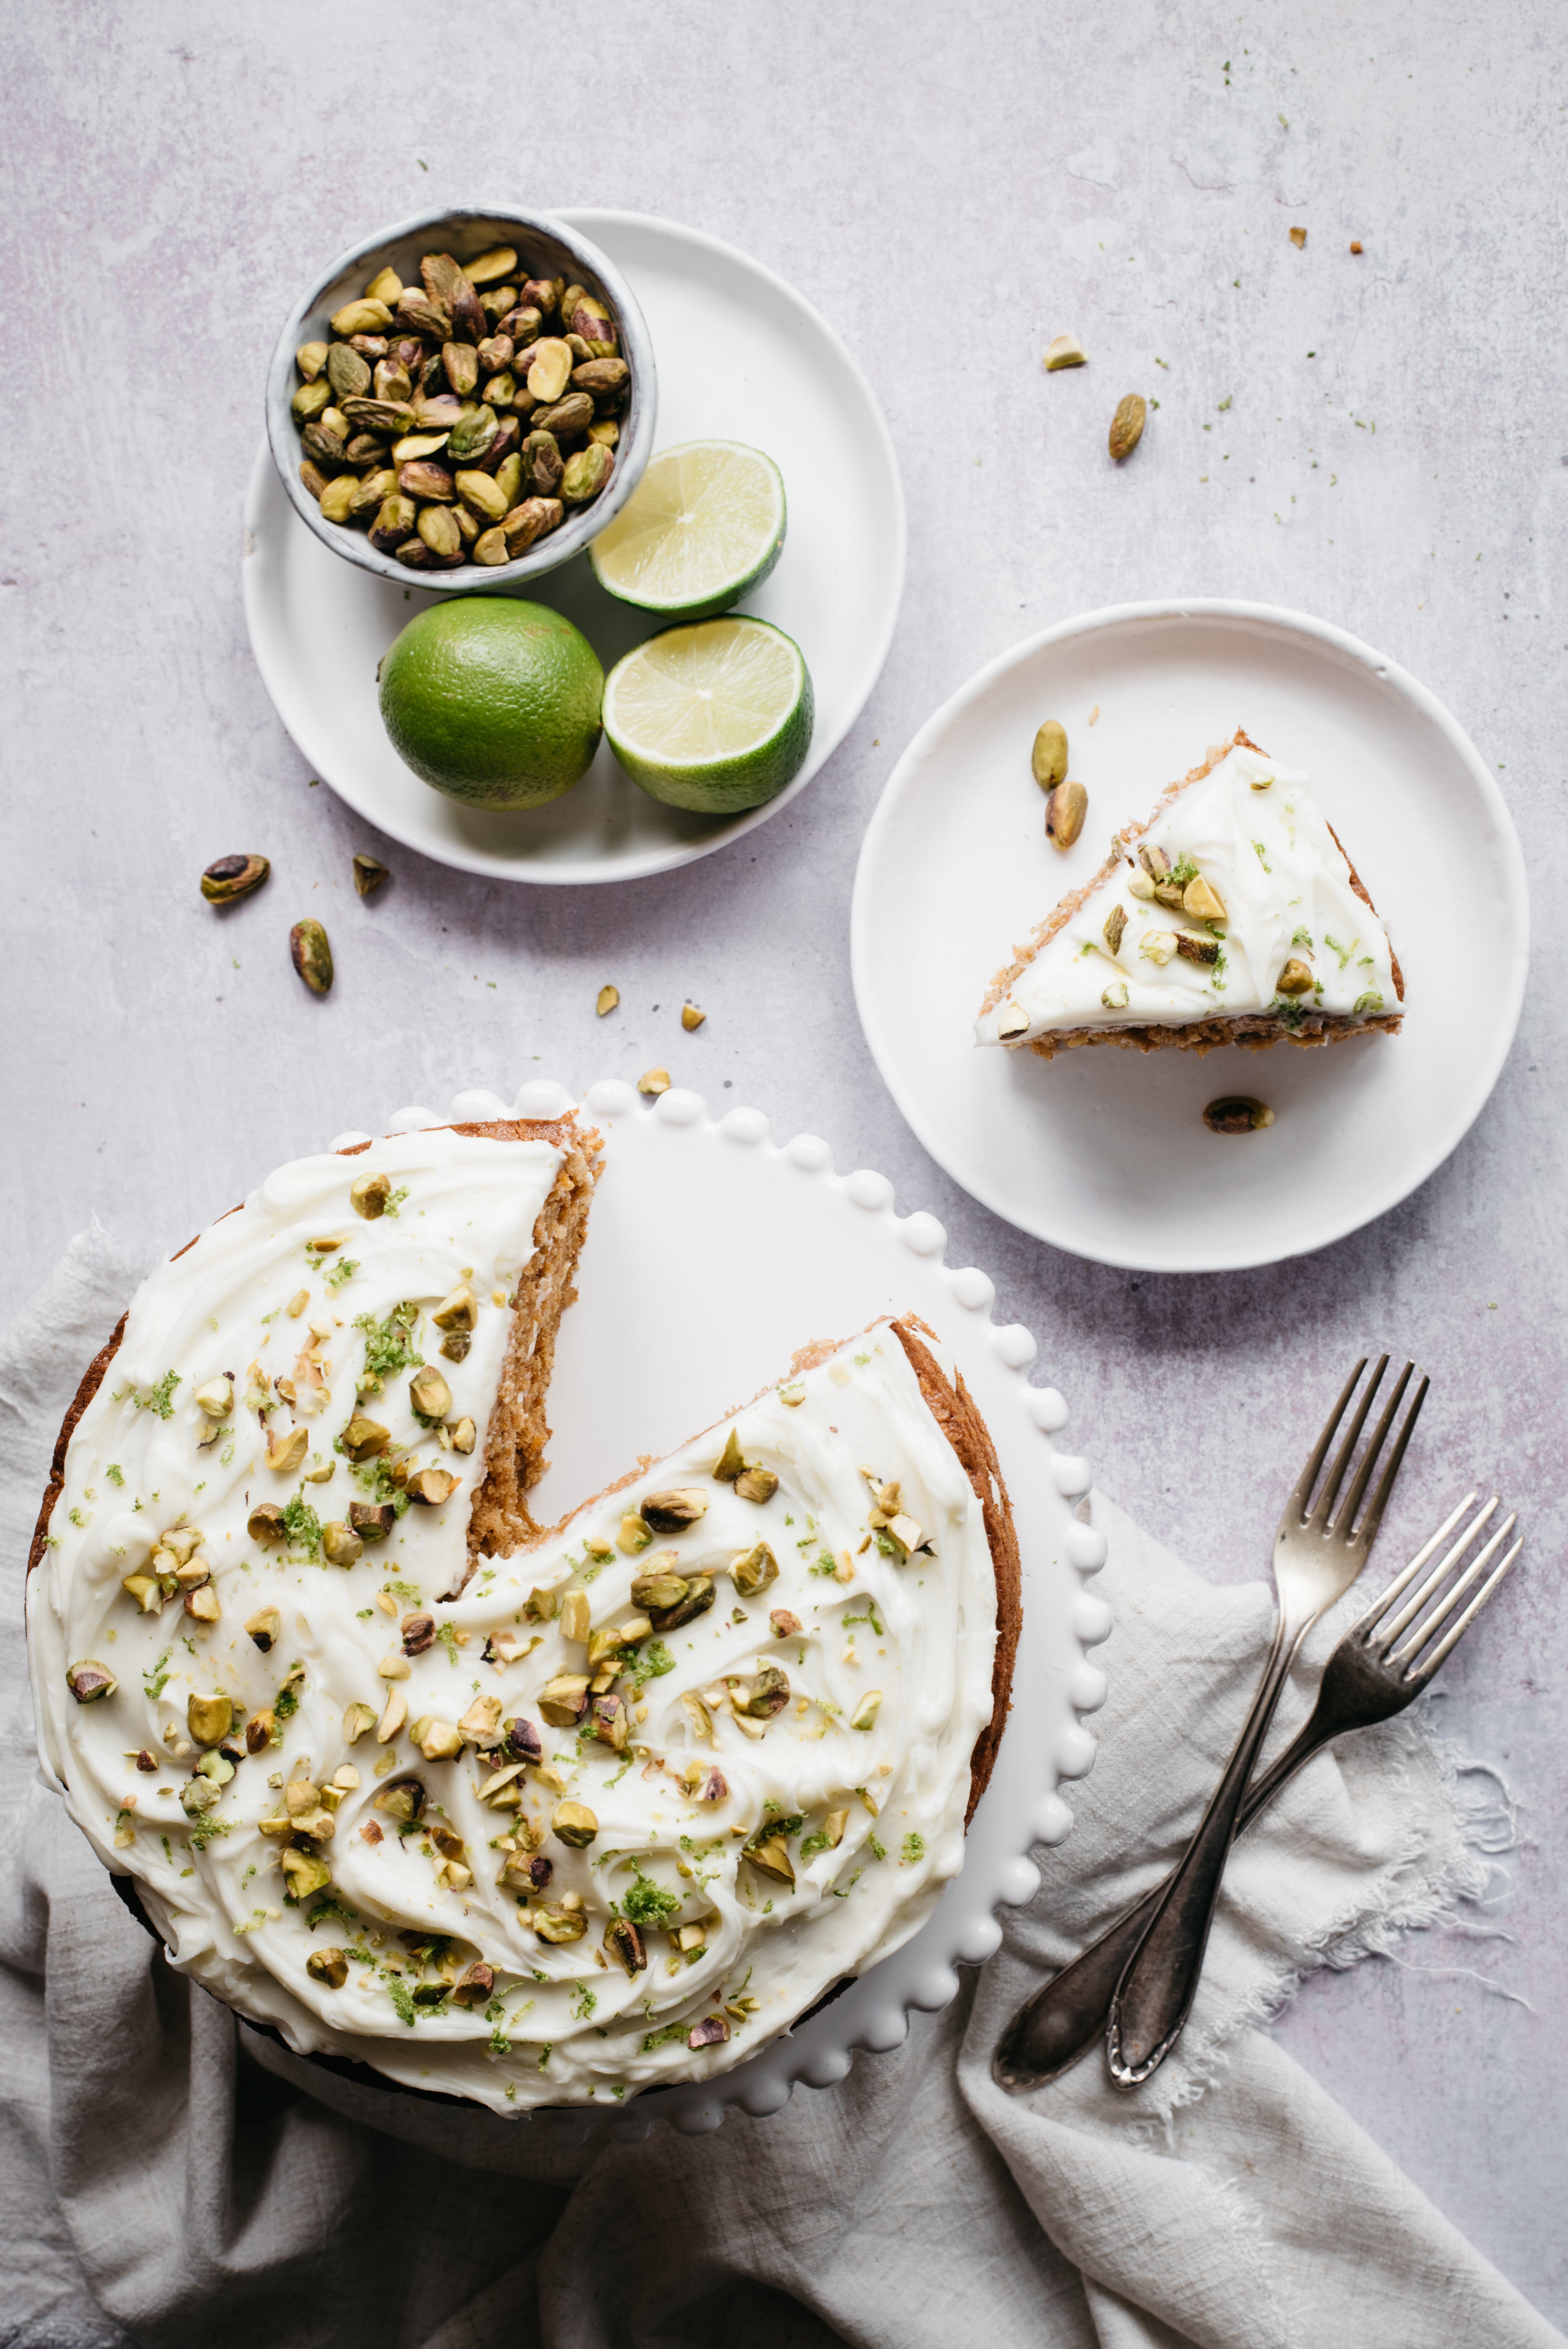 Over the top shot of cake with slice removed. 2 forks pistachios and limes